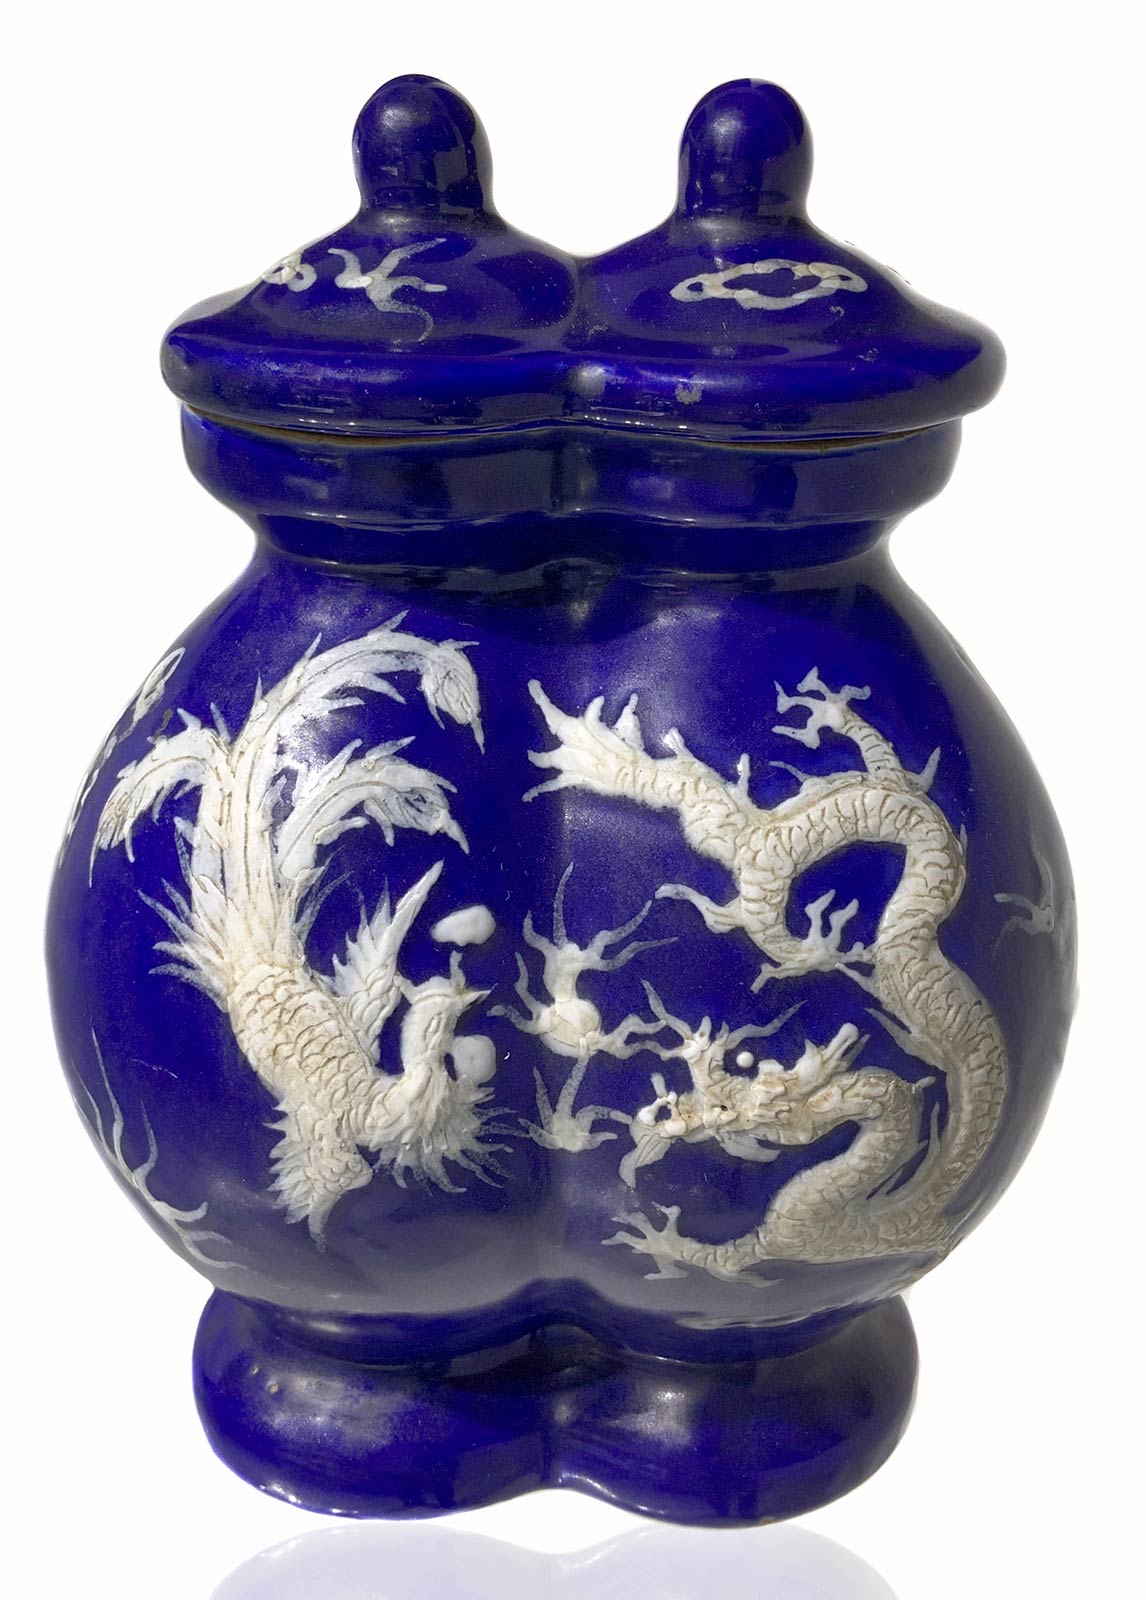 Double blue vase with relief decoration on both sides with dragons in white, with lid. China 20th